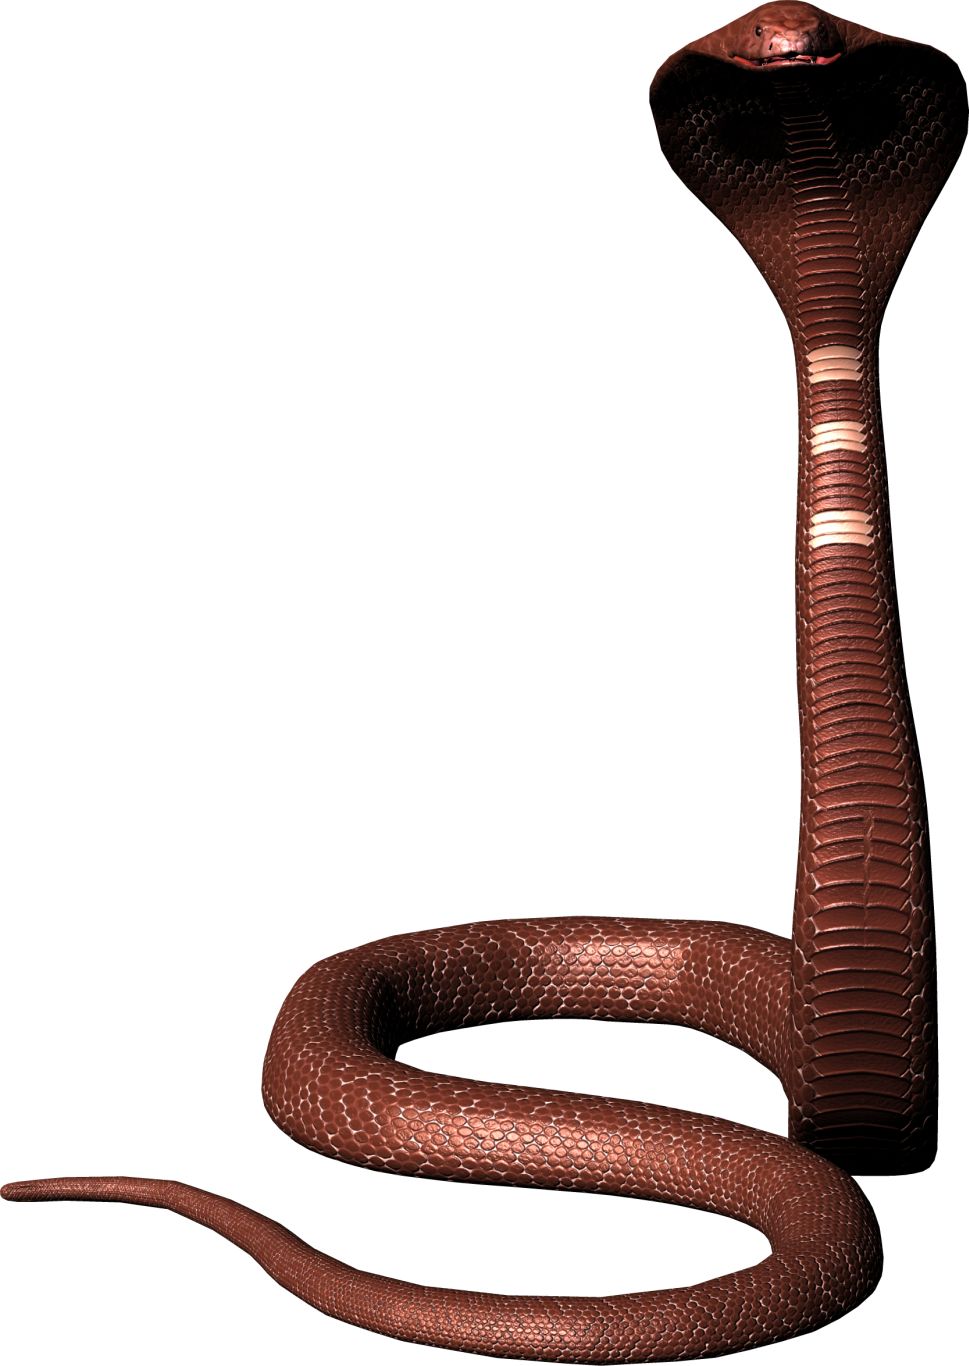 Cobra snake PNG image, free download picture    图片编号:4051